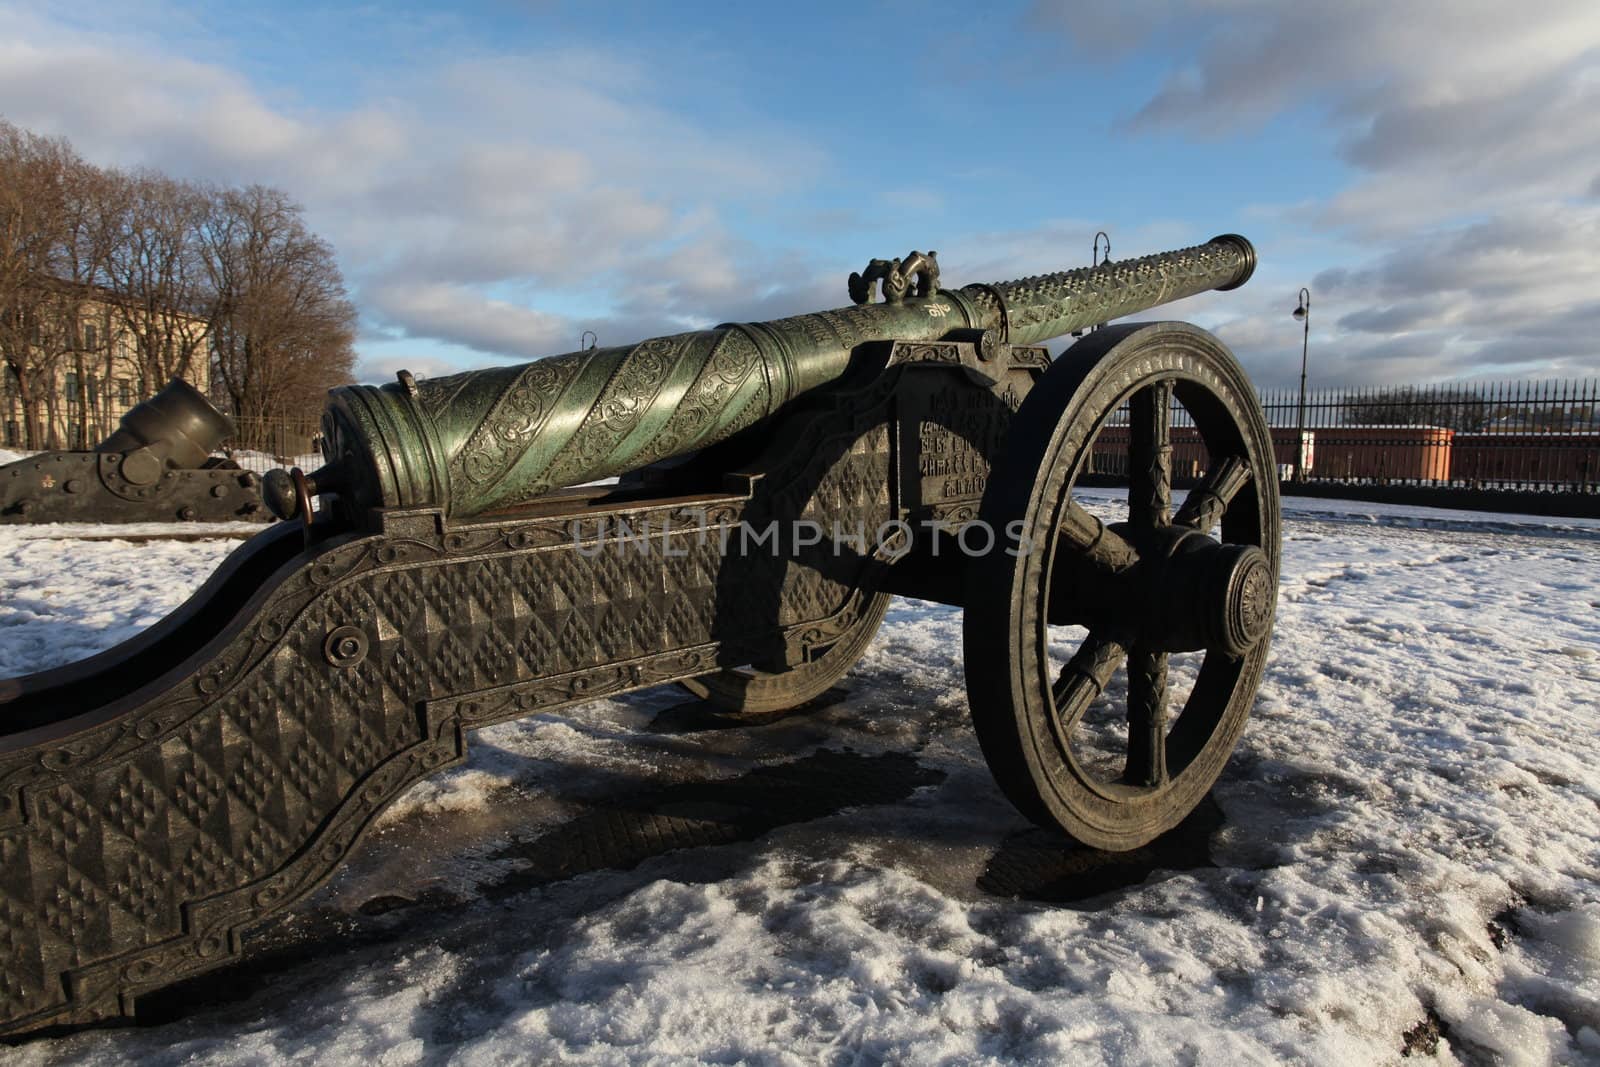 The old medieval bronze cannon on the gun carriage